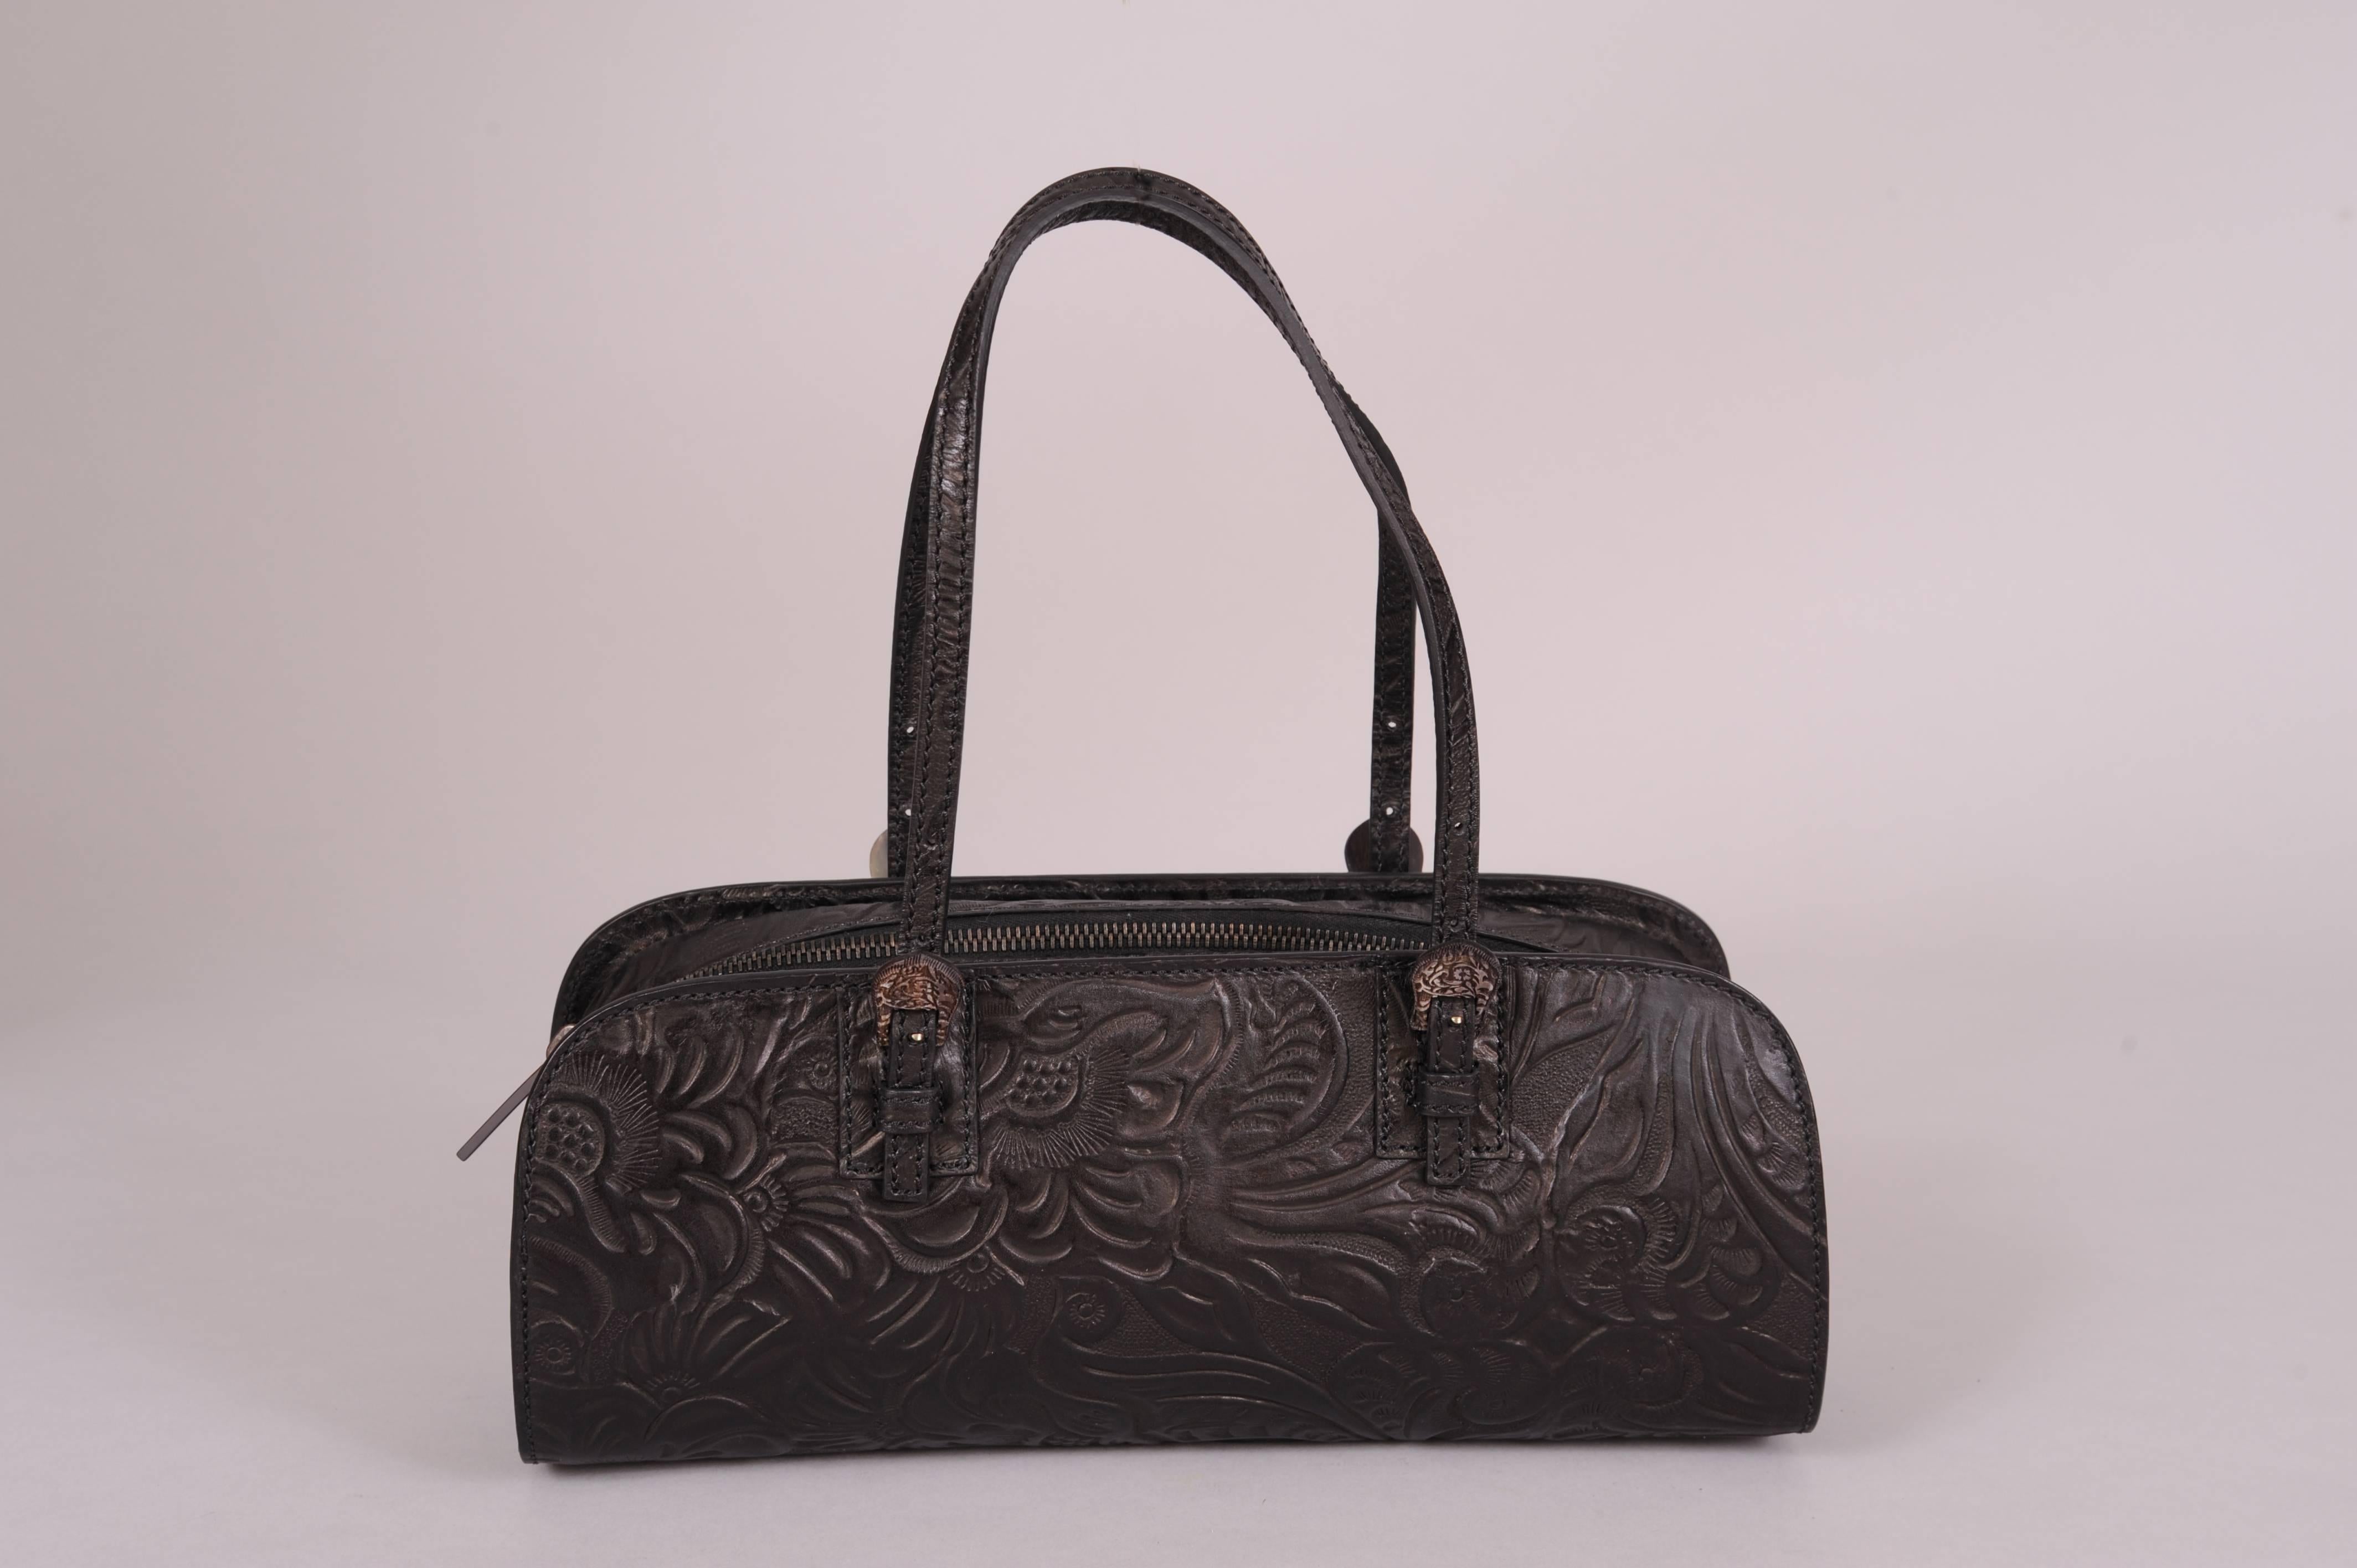 This chic handbag has double straps with dark grey mother of pearl buckles that are carved to resemble Western silver buckles. The bag is tooled leather in a floral pattern with a center top zipper. It is lined in red satin with a zippered pocket